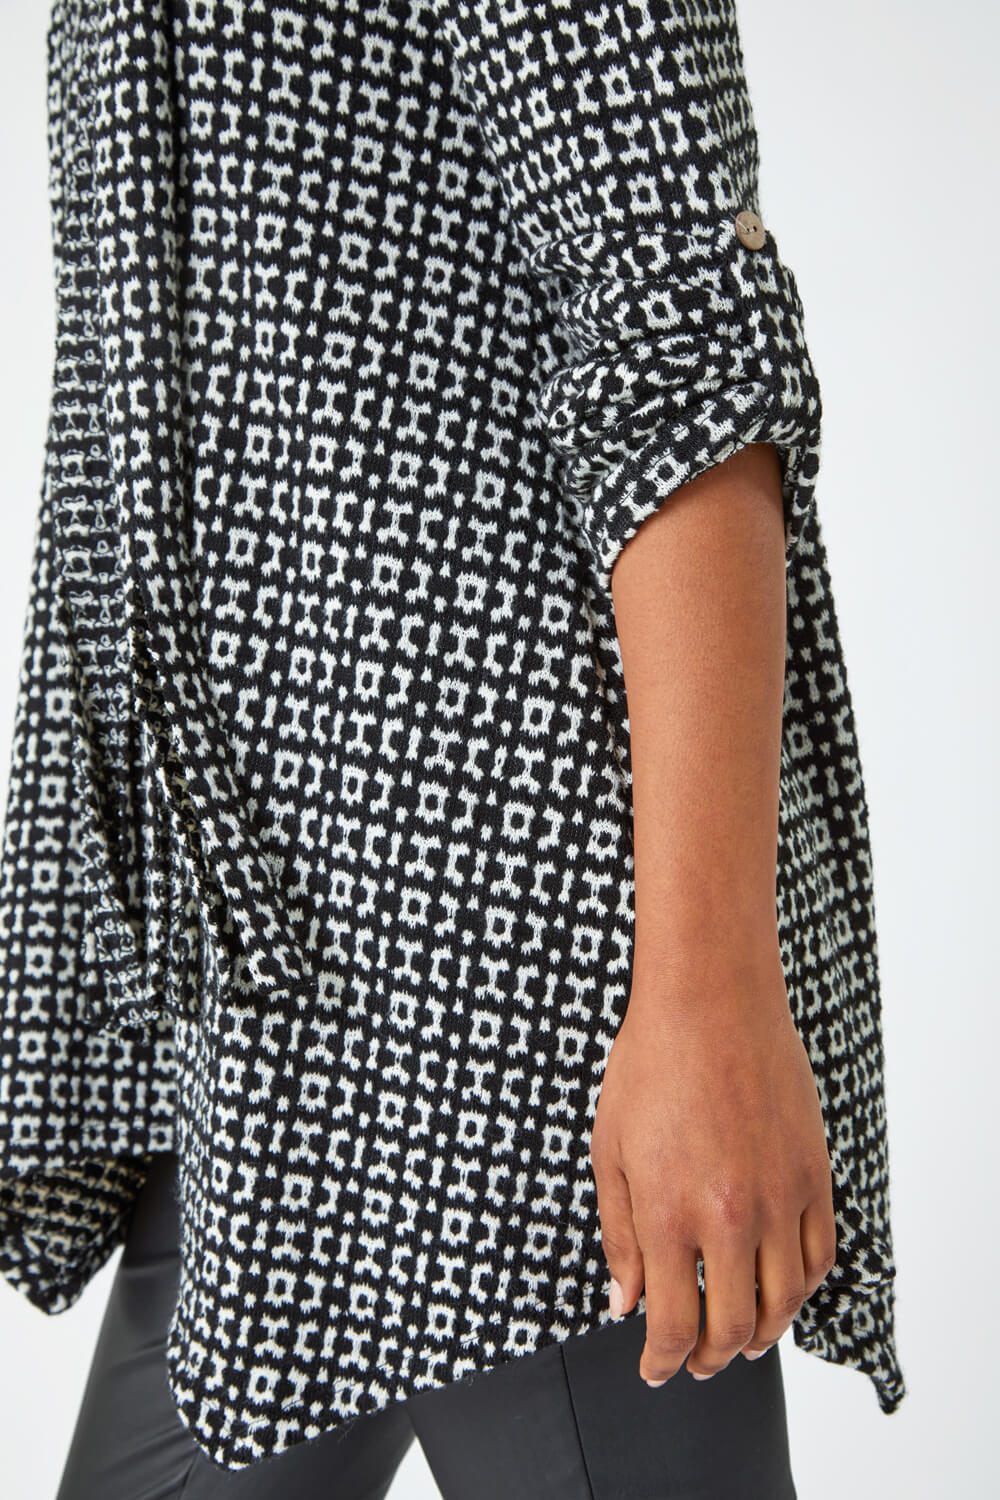 Black Abstract Print Tunic Stretch Top, Image 5 of 5